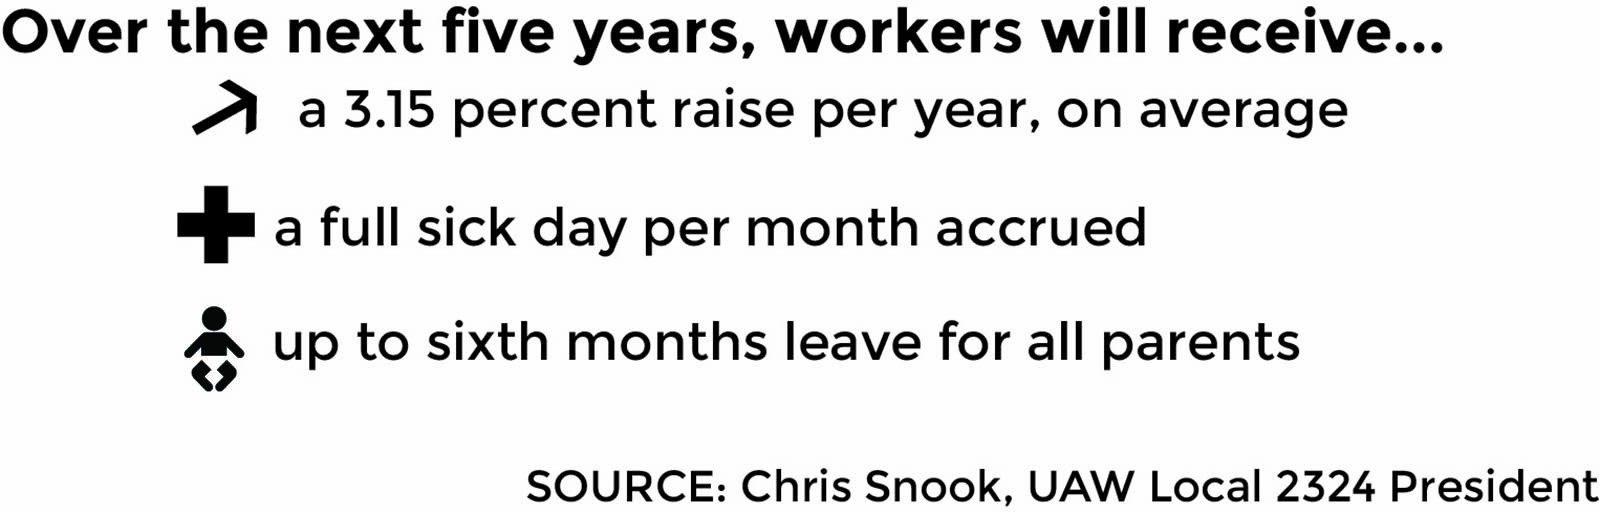 Boston University has reached a pay raise agreement with members of the United Automobile, Aerospace and Agricultural Implement Workers of America Local 2324 that includes a 3.15 percent raise per year, on average. GRAPHIC BY KATELYN PILLEY/DAILY FREE PRESS STAFF